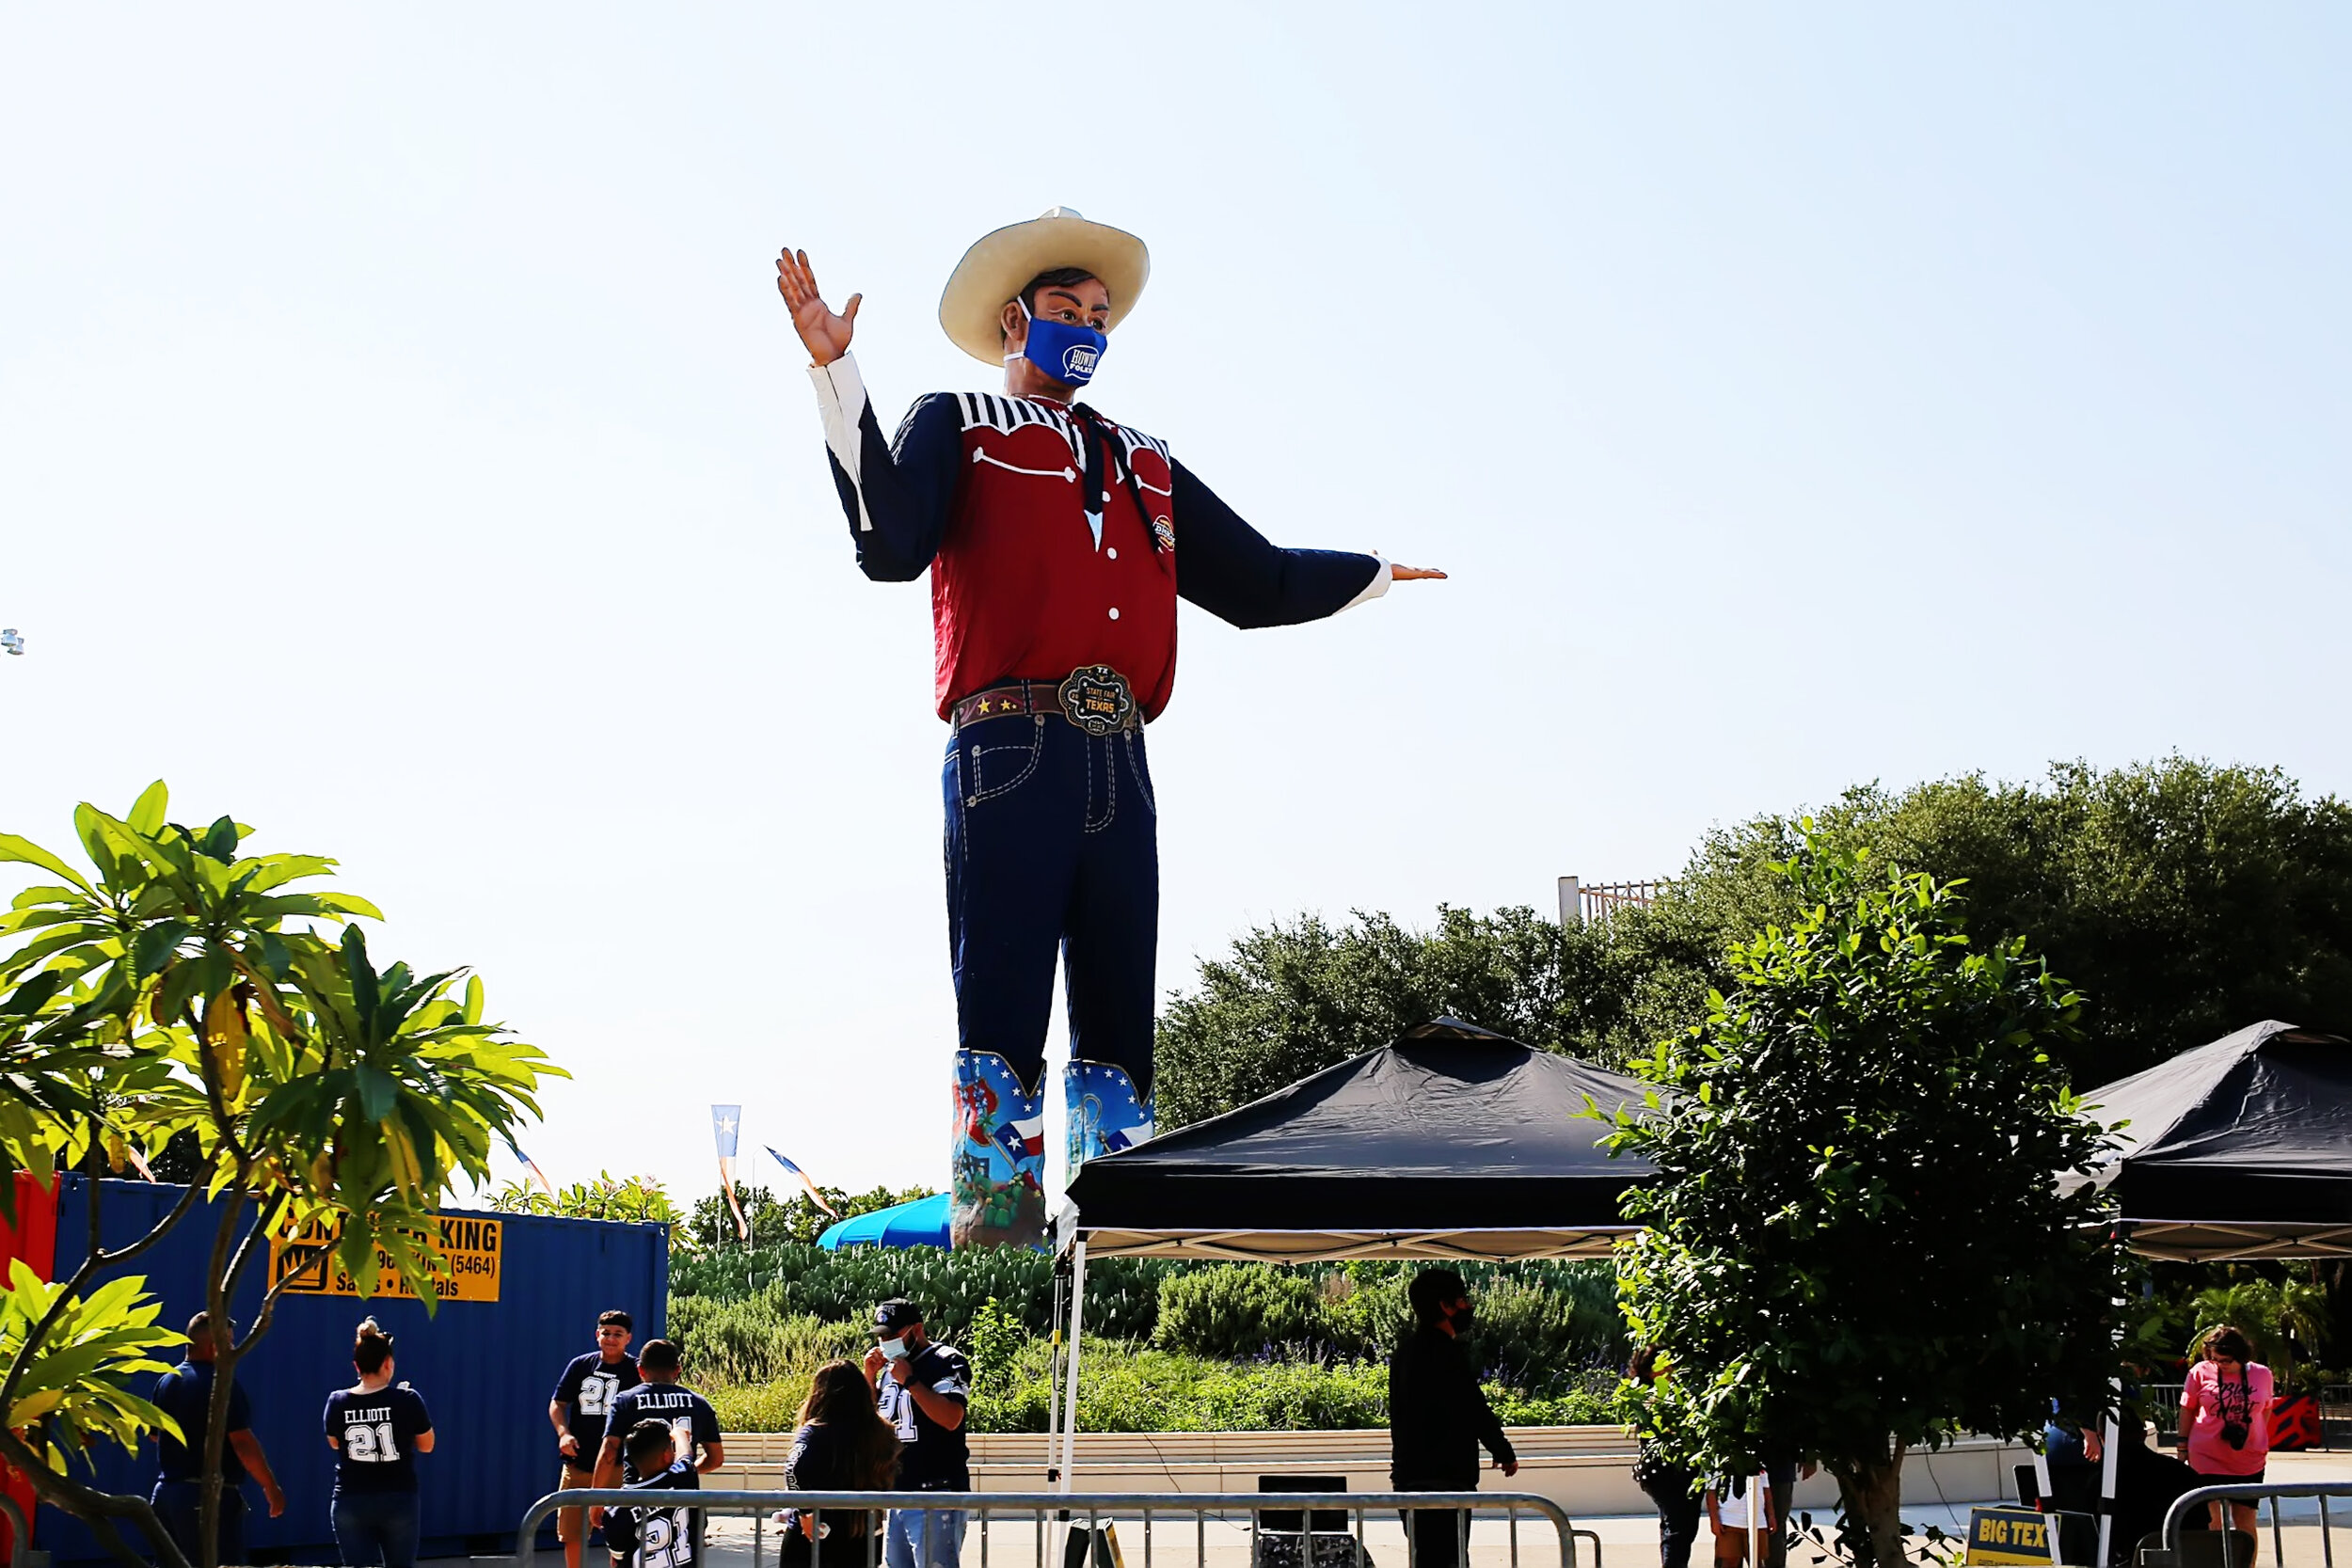 But the thrill of the day was getting to have a masked photo session with Big Tex.